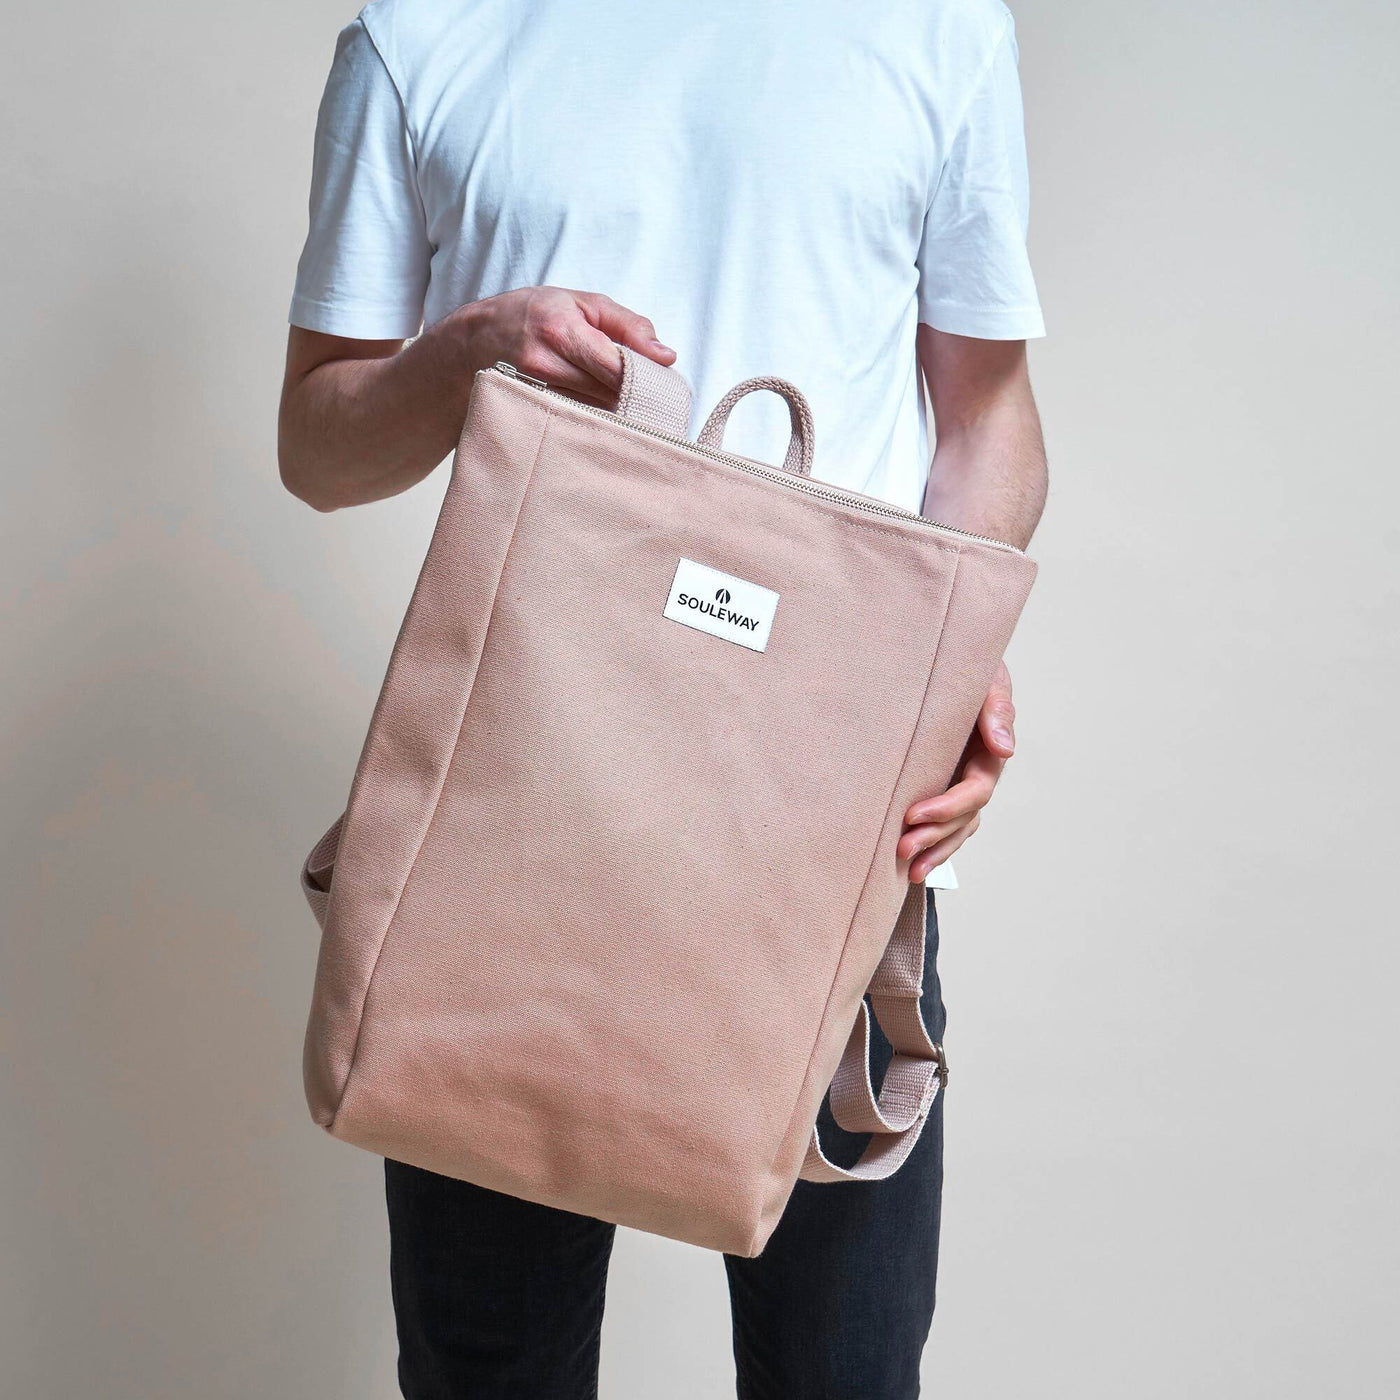 Simple Backpack L